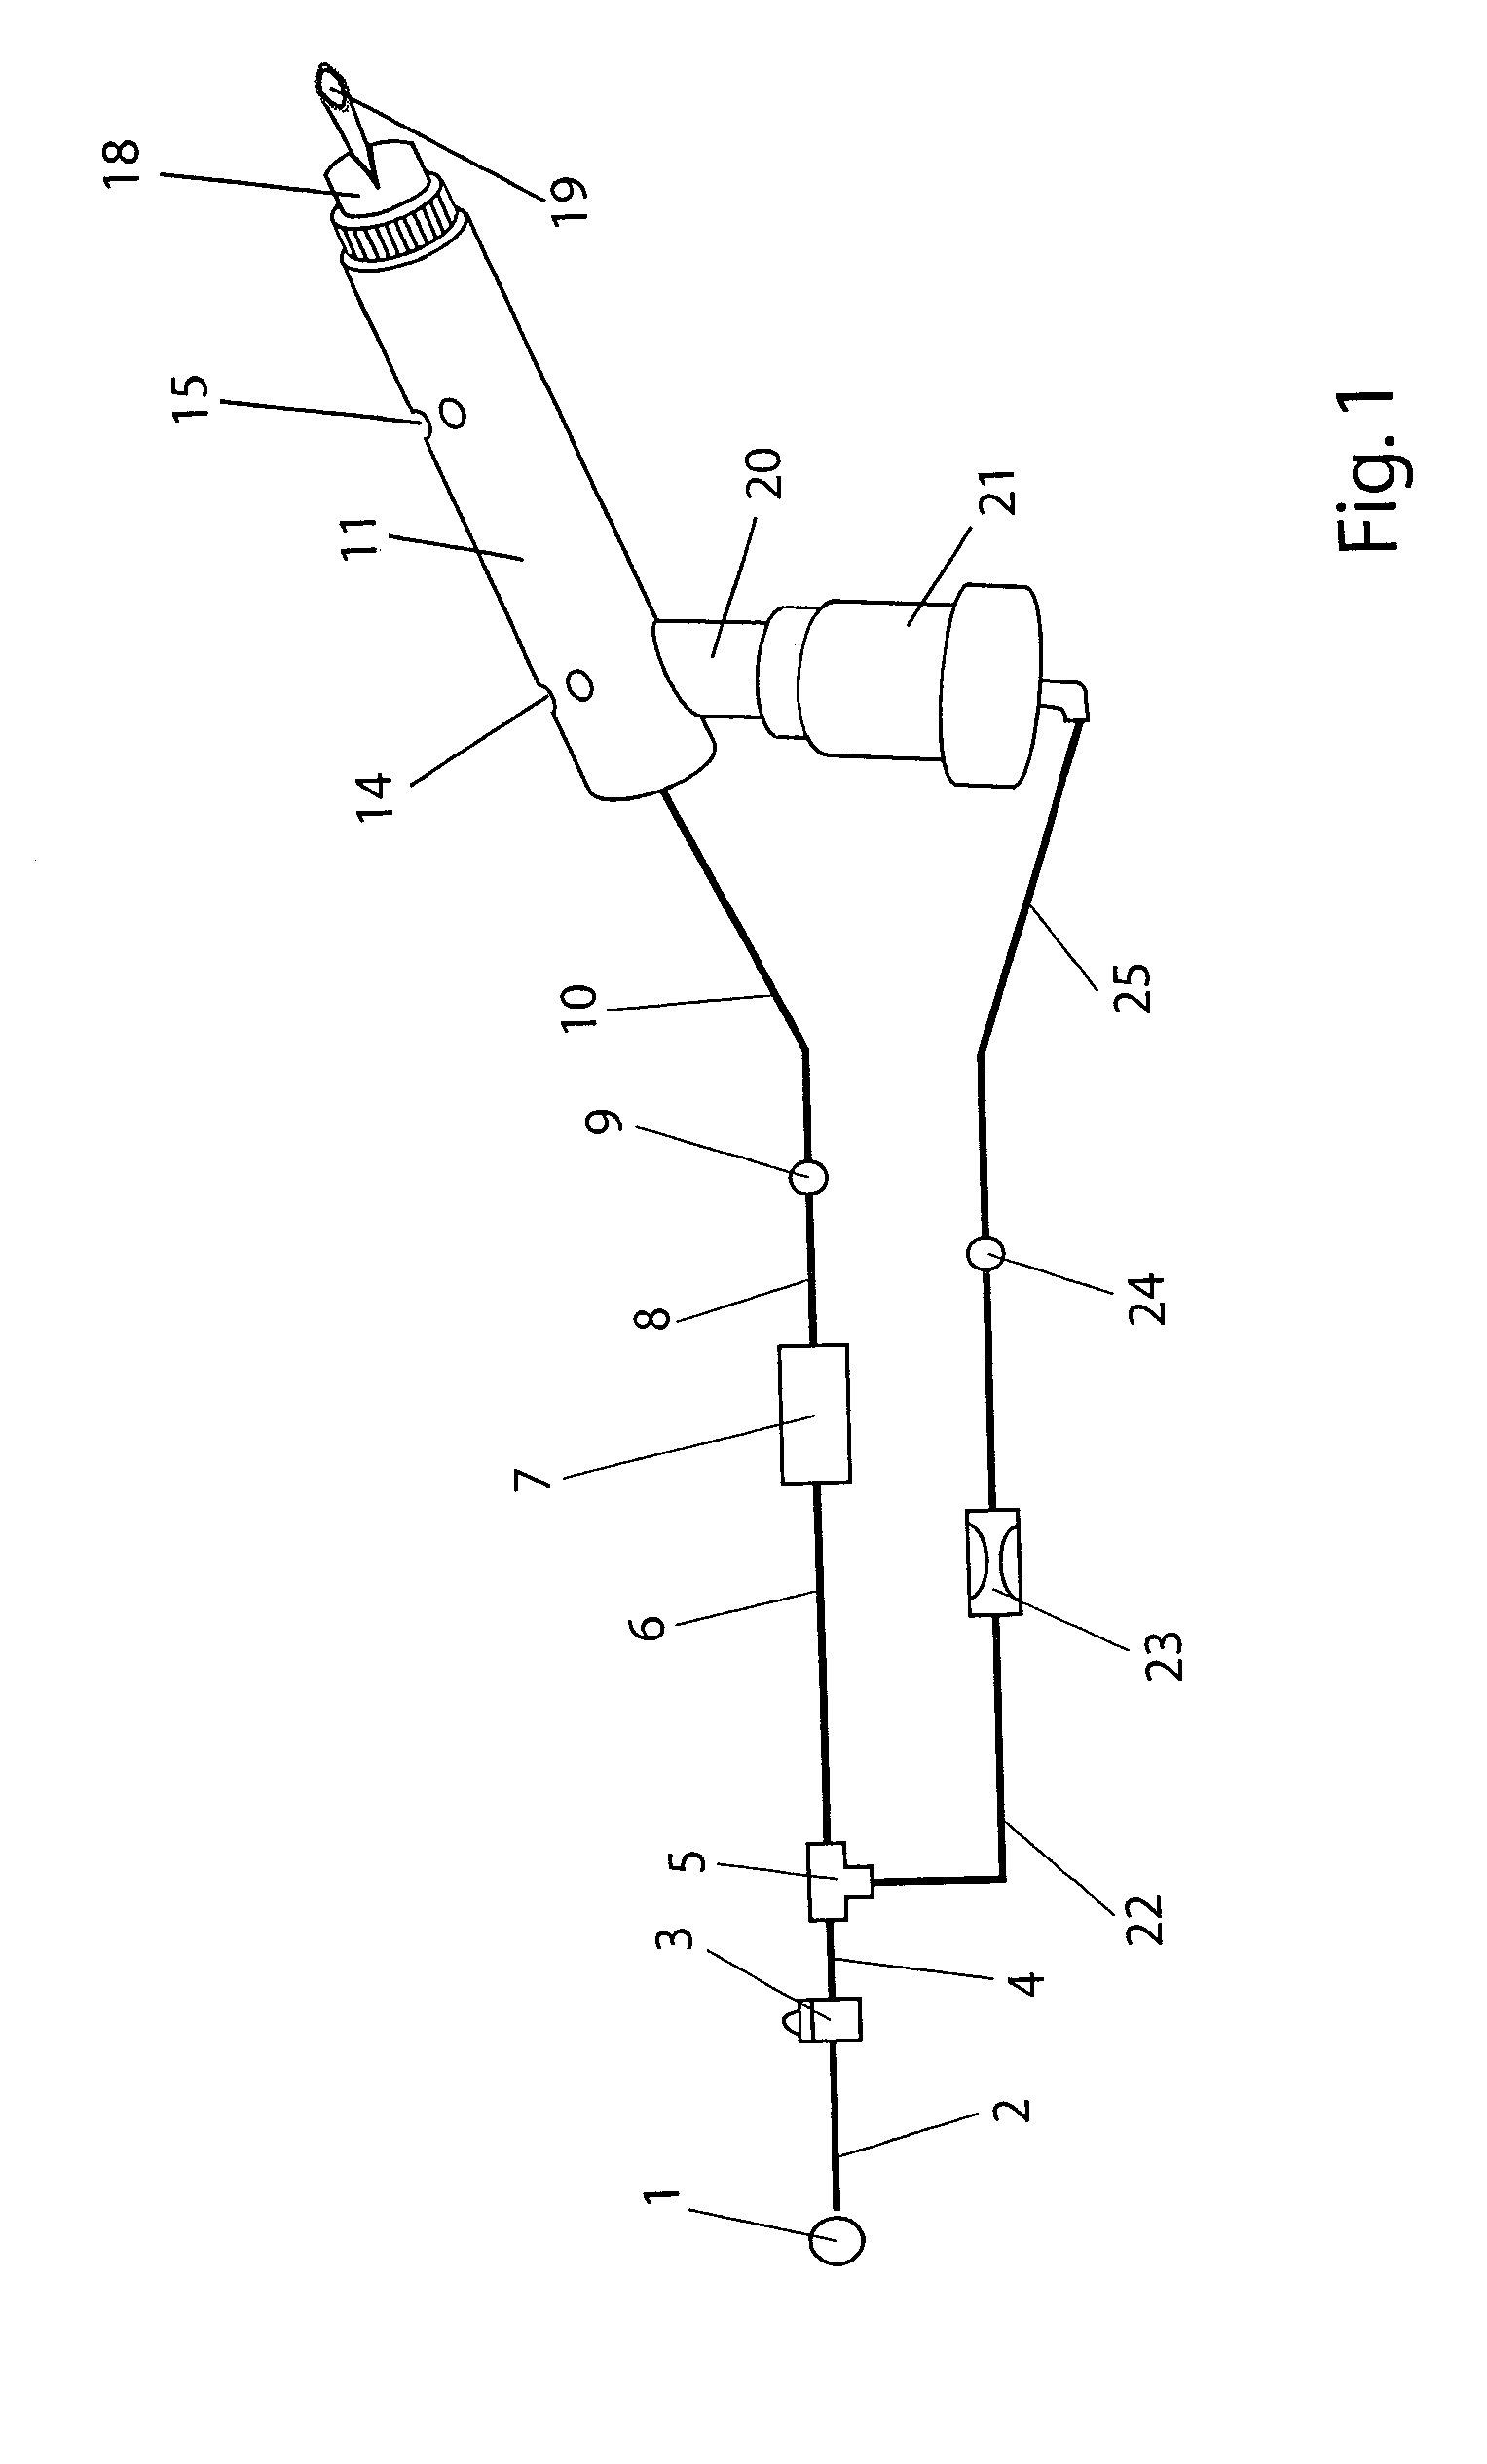 Continuous high-frequency oscillation breathing treatment apparatus